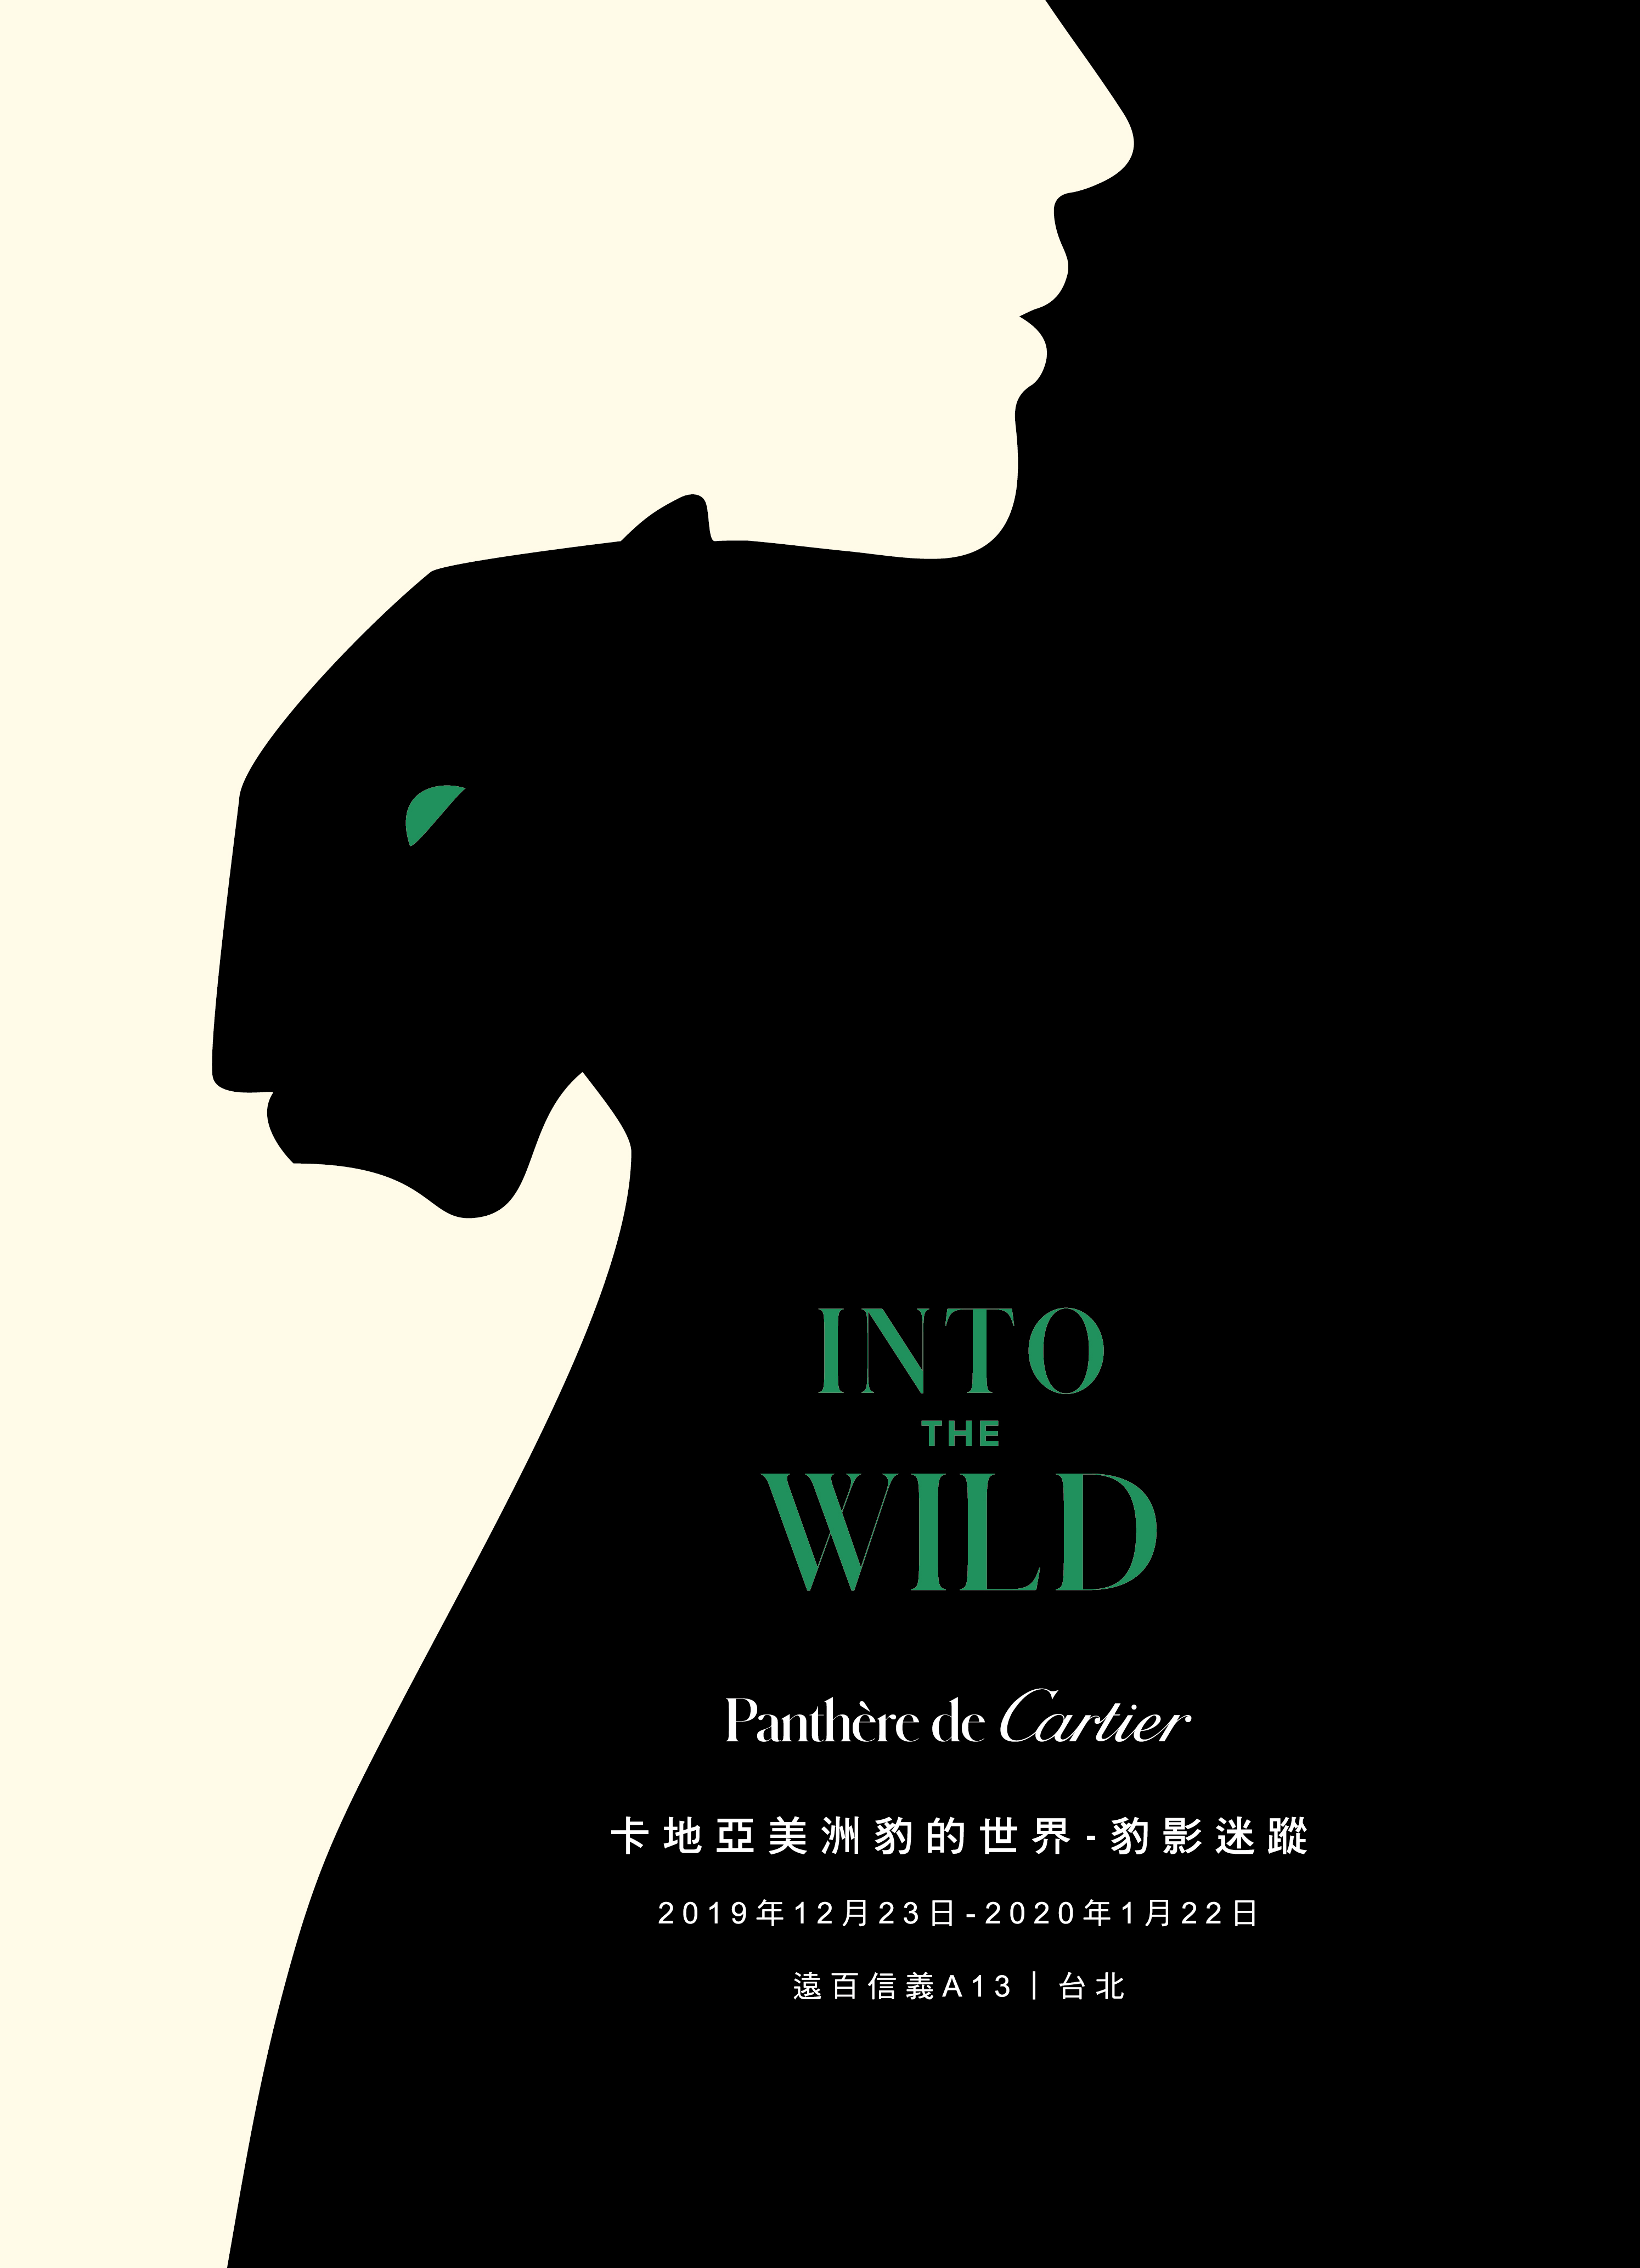 Cartier卡地亞「INTO THE WILD豹影迷蹤」展覽，演繹美洲豹的不朽傳奇